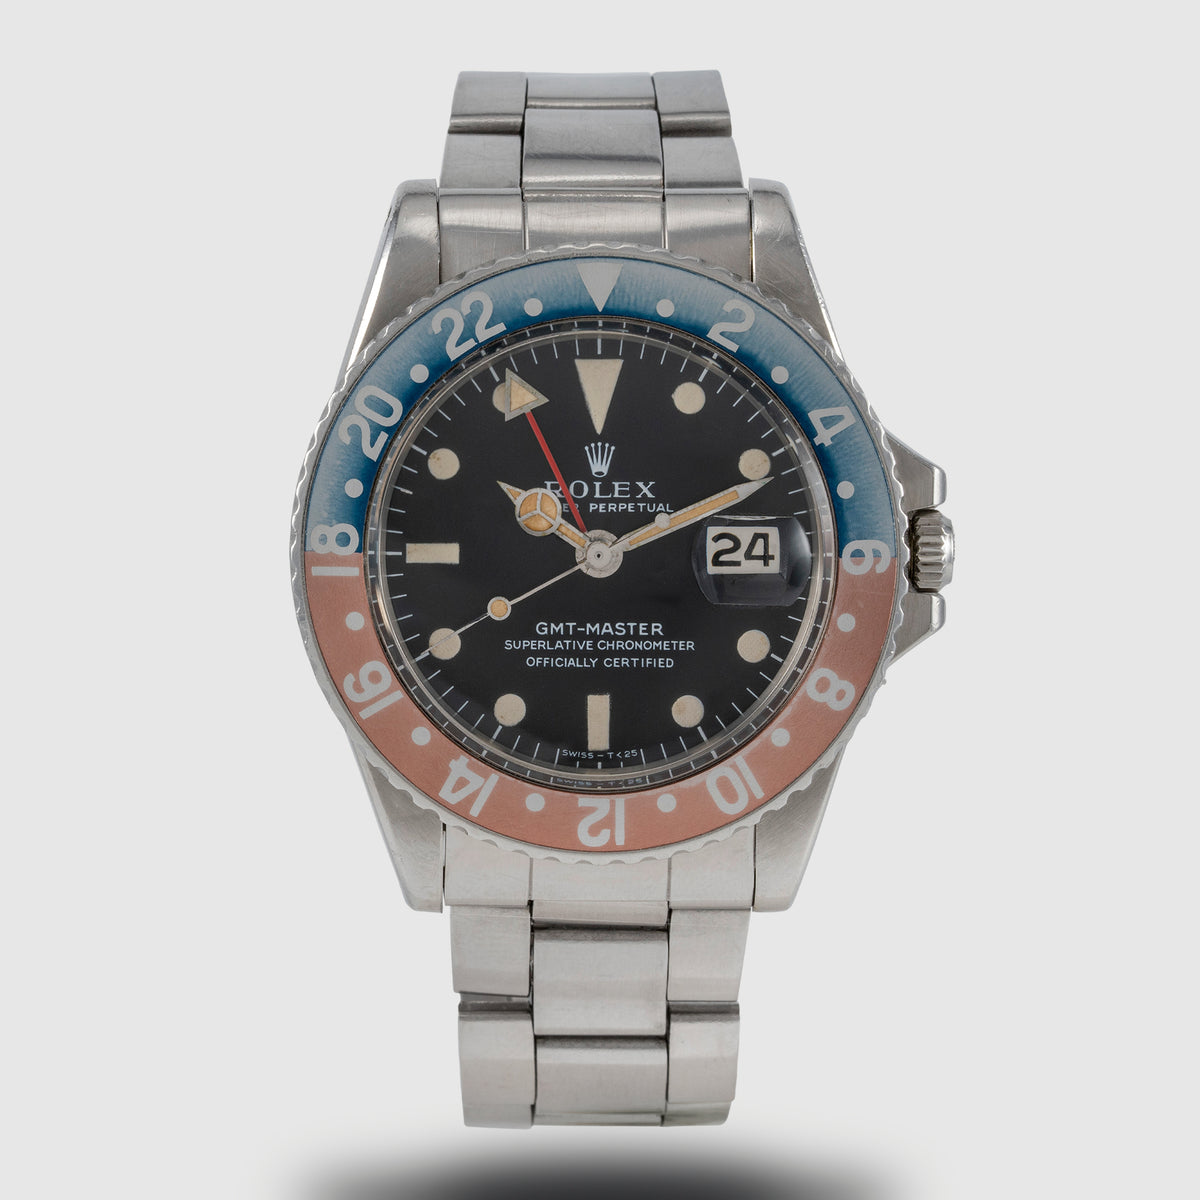 1969 Rolex GMT Master MK1 Ref. 1675 (with Box & Papers)